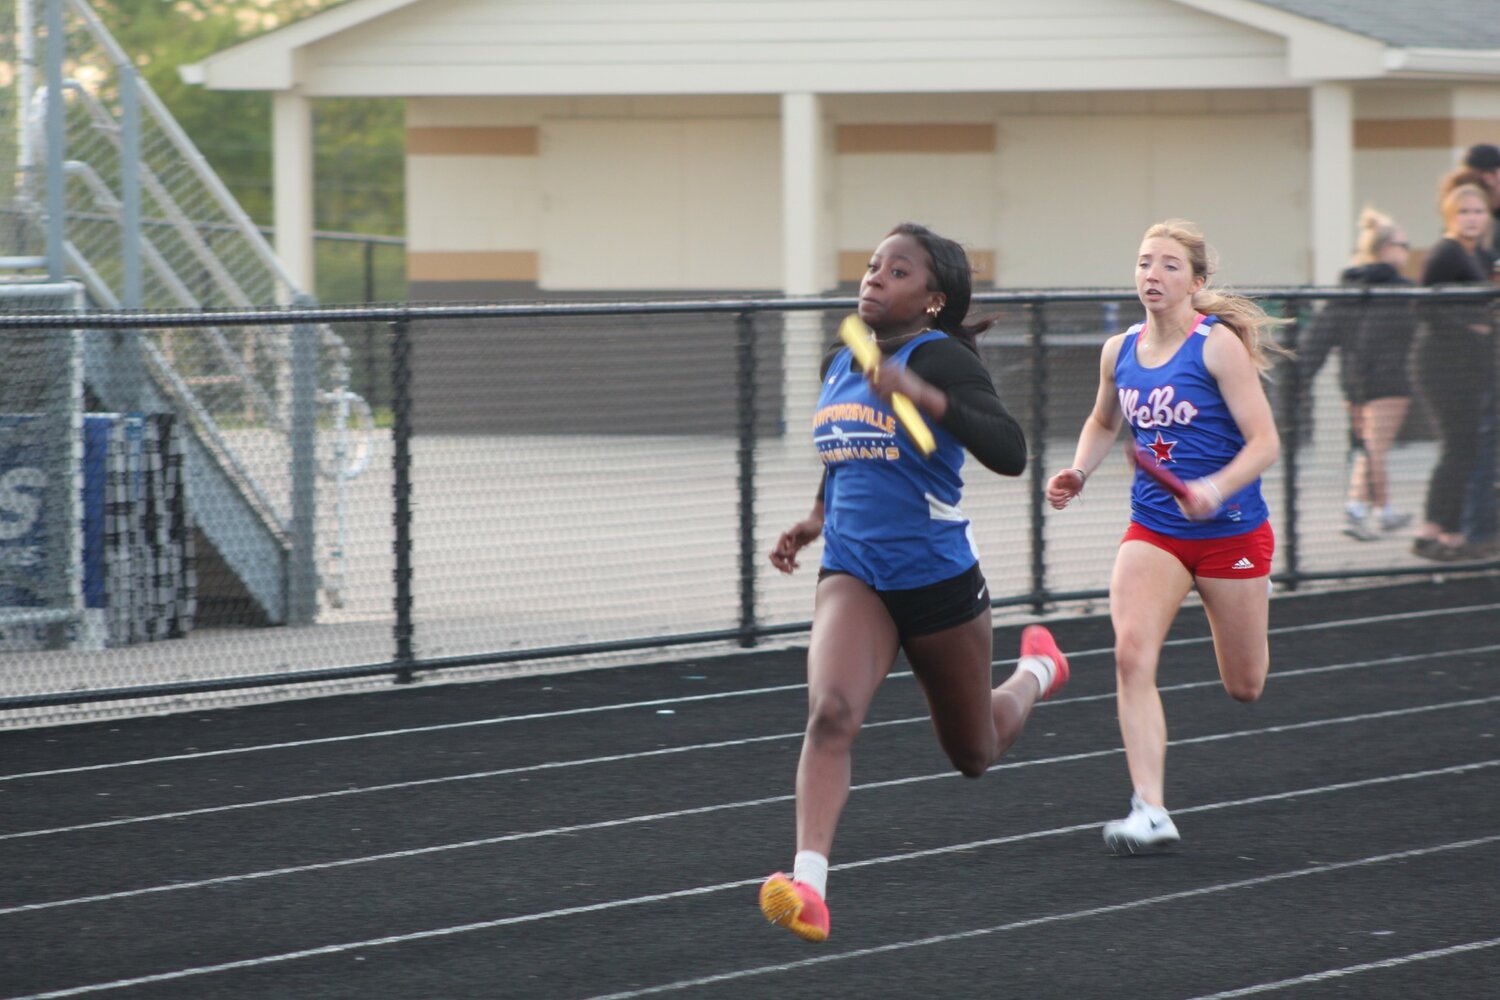 Crawfordsville's Naarah Byard went a perfect 4-4 at the Sagamore Conference meet winning the 100 meter dash, long jump, and the 4x100 and 4x400 relays.